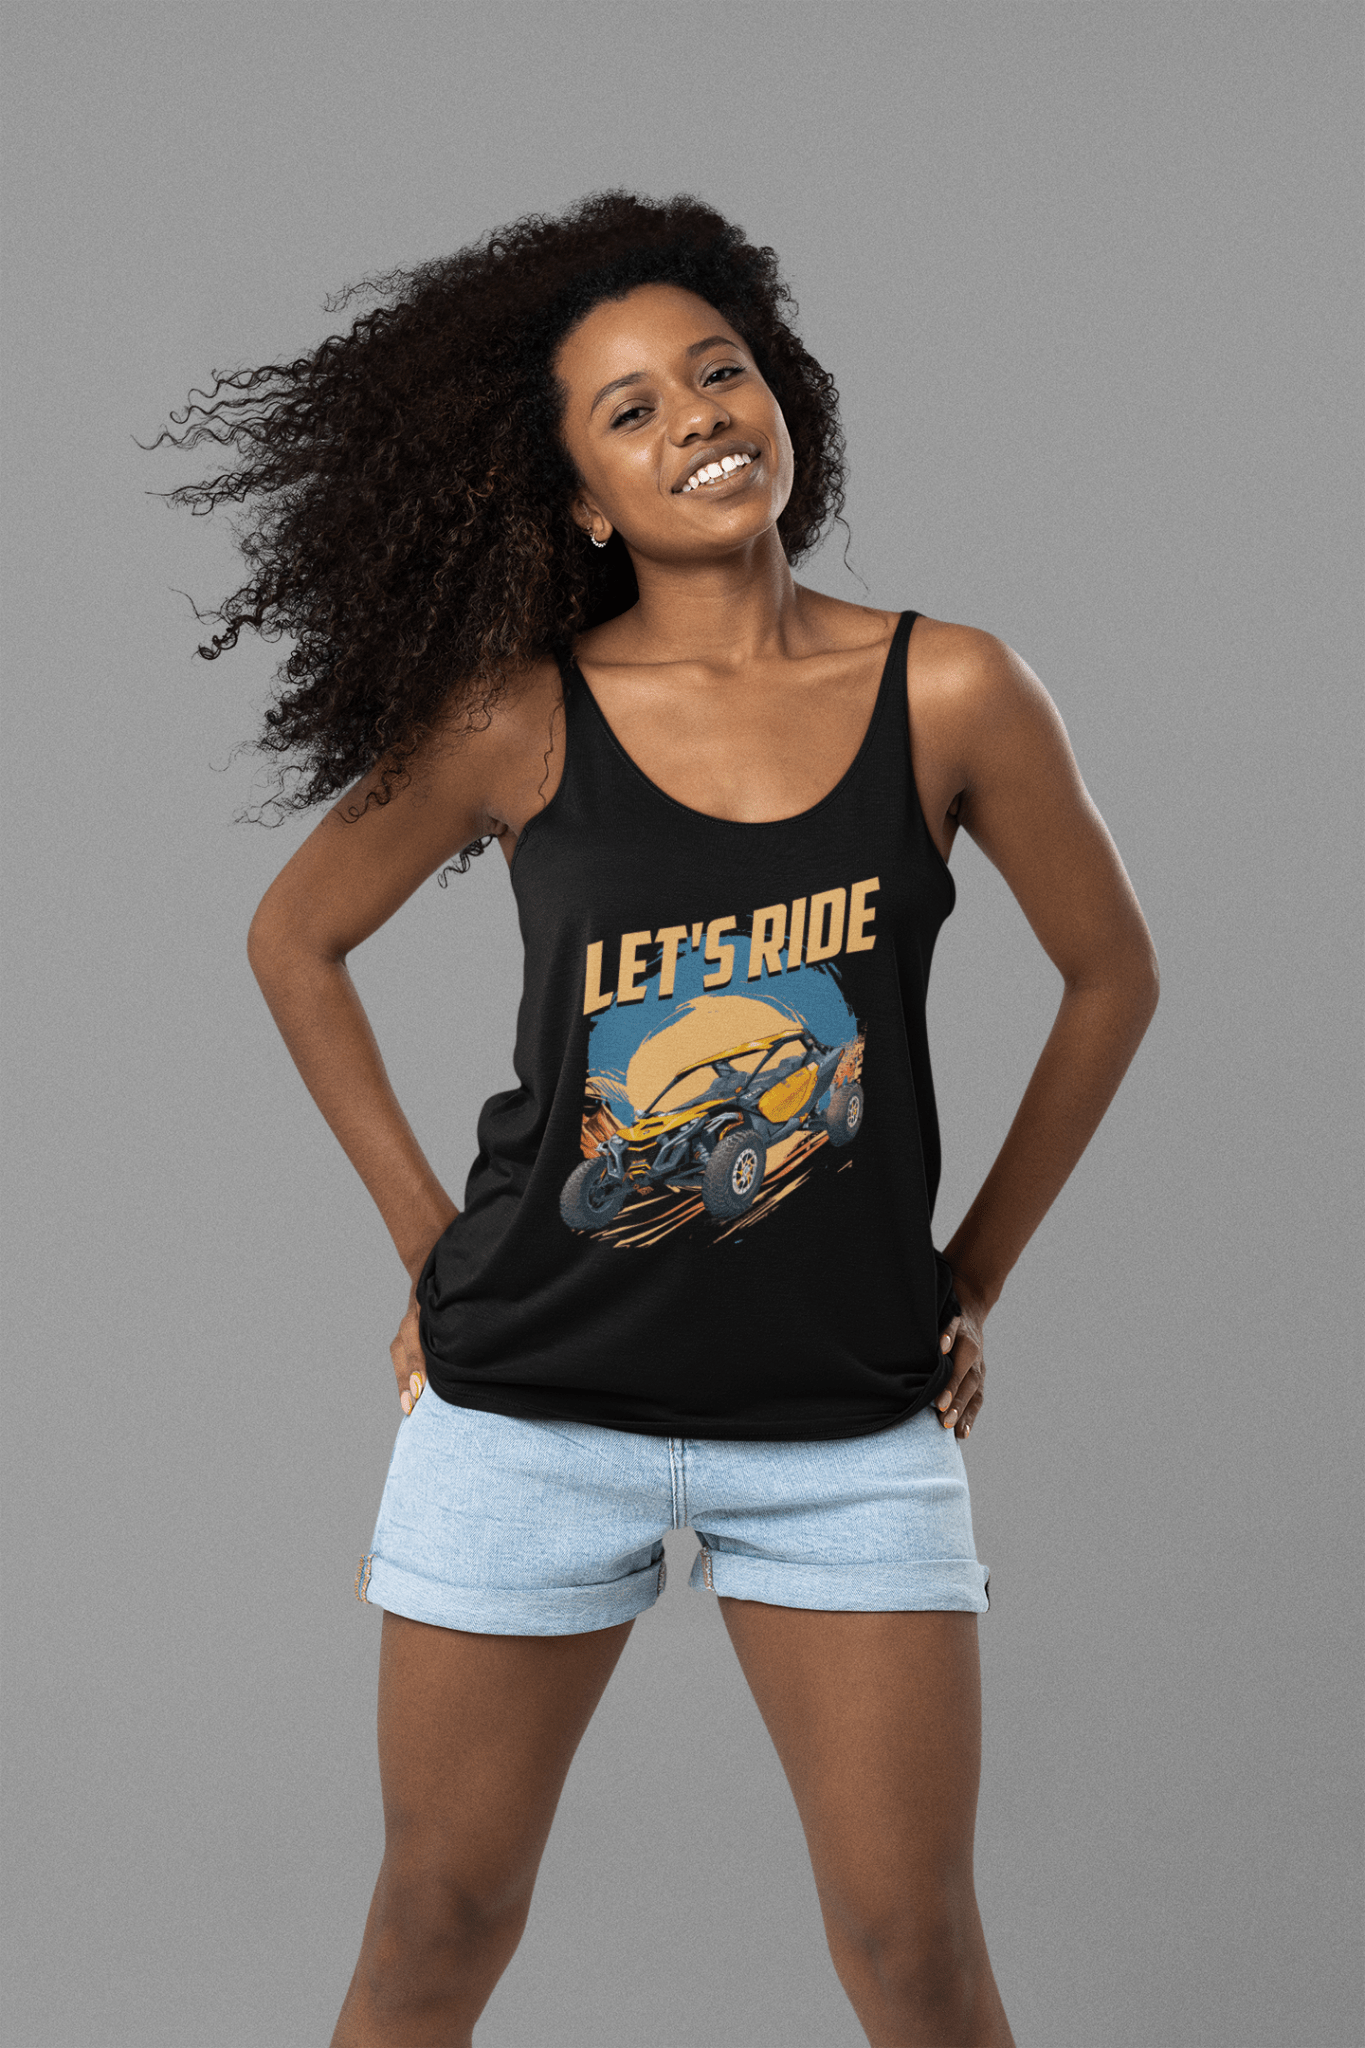 Let's Ride Side-by-Side Women's Tank Top - Goats Trail Off-Road Apparel Company